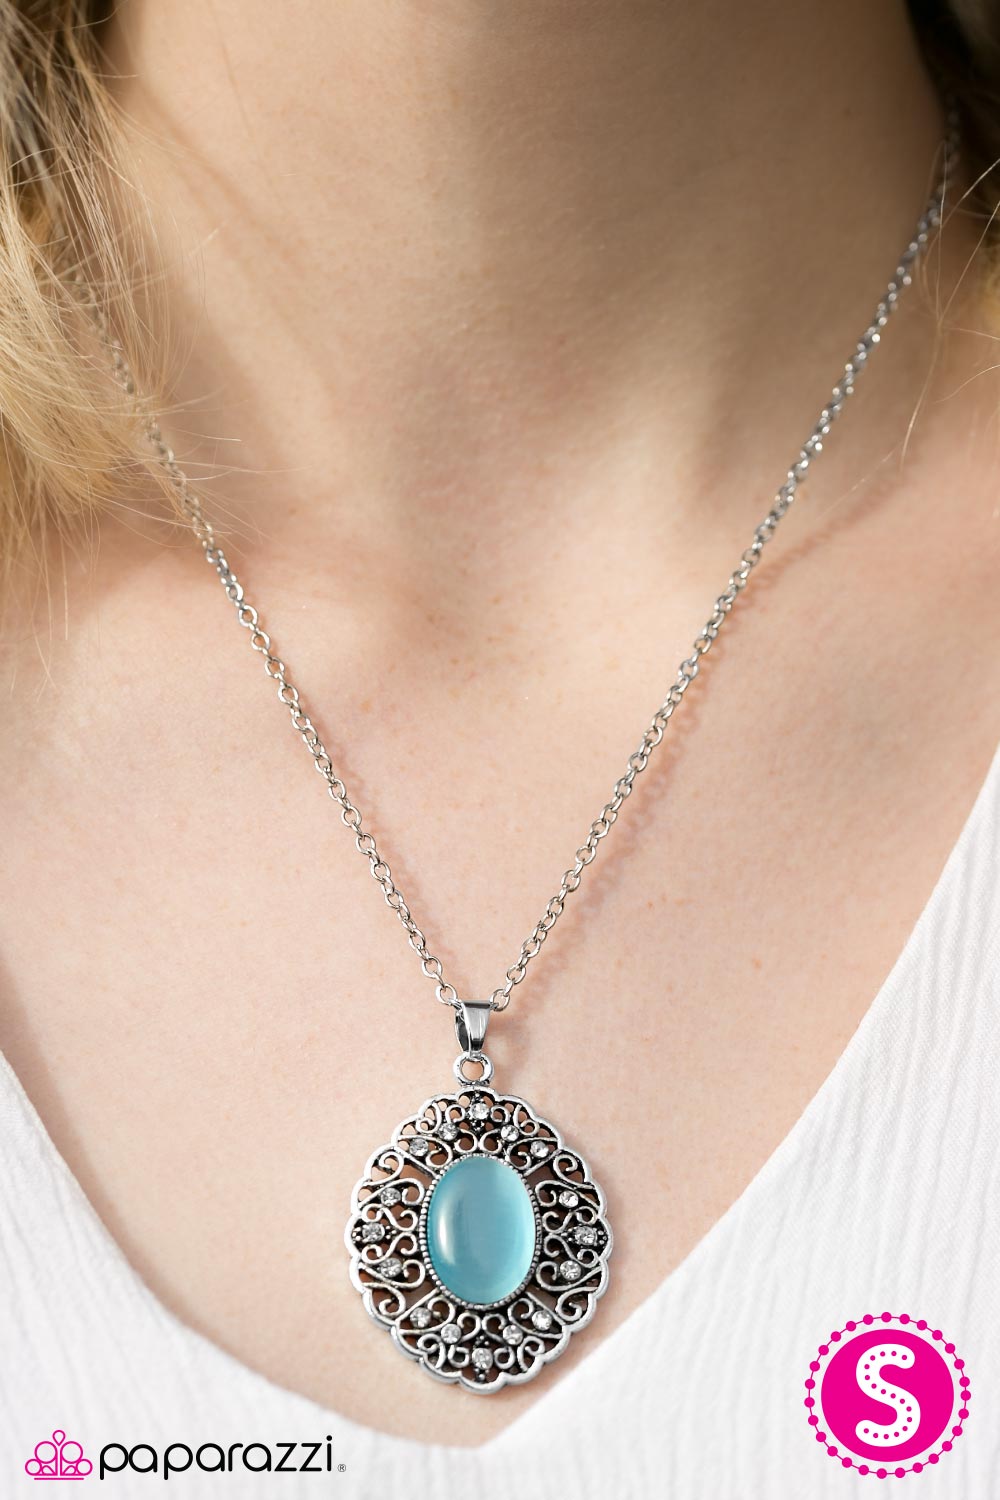 Heart Of Glace - Blue - Paparazzi necklace